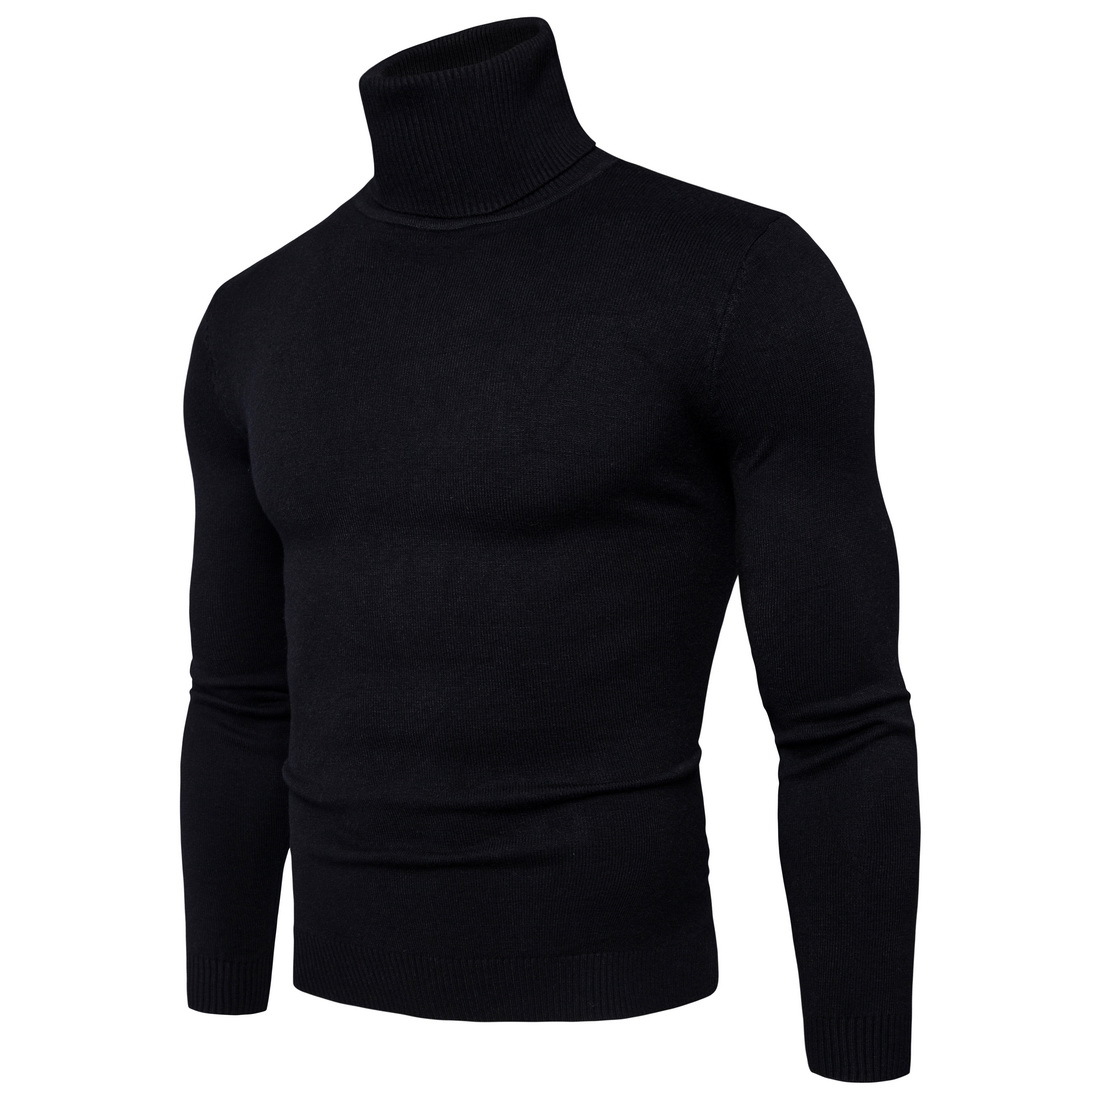 Winter Warm Turtleneck Sweater Men Fashion Solid Knitted Mens Double Collar Slim Fit Pullover A030